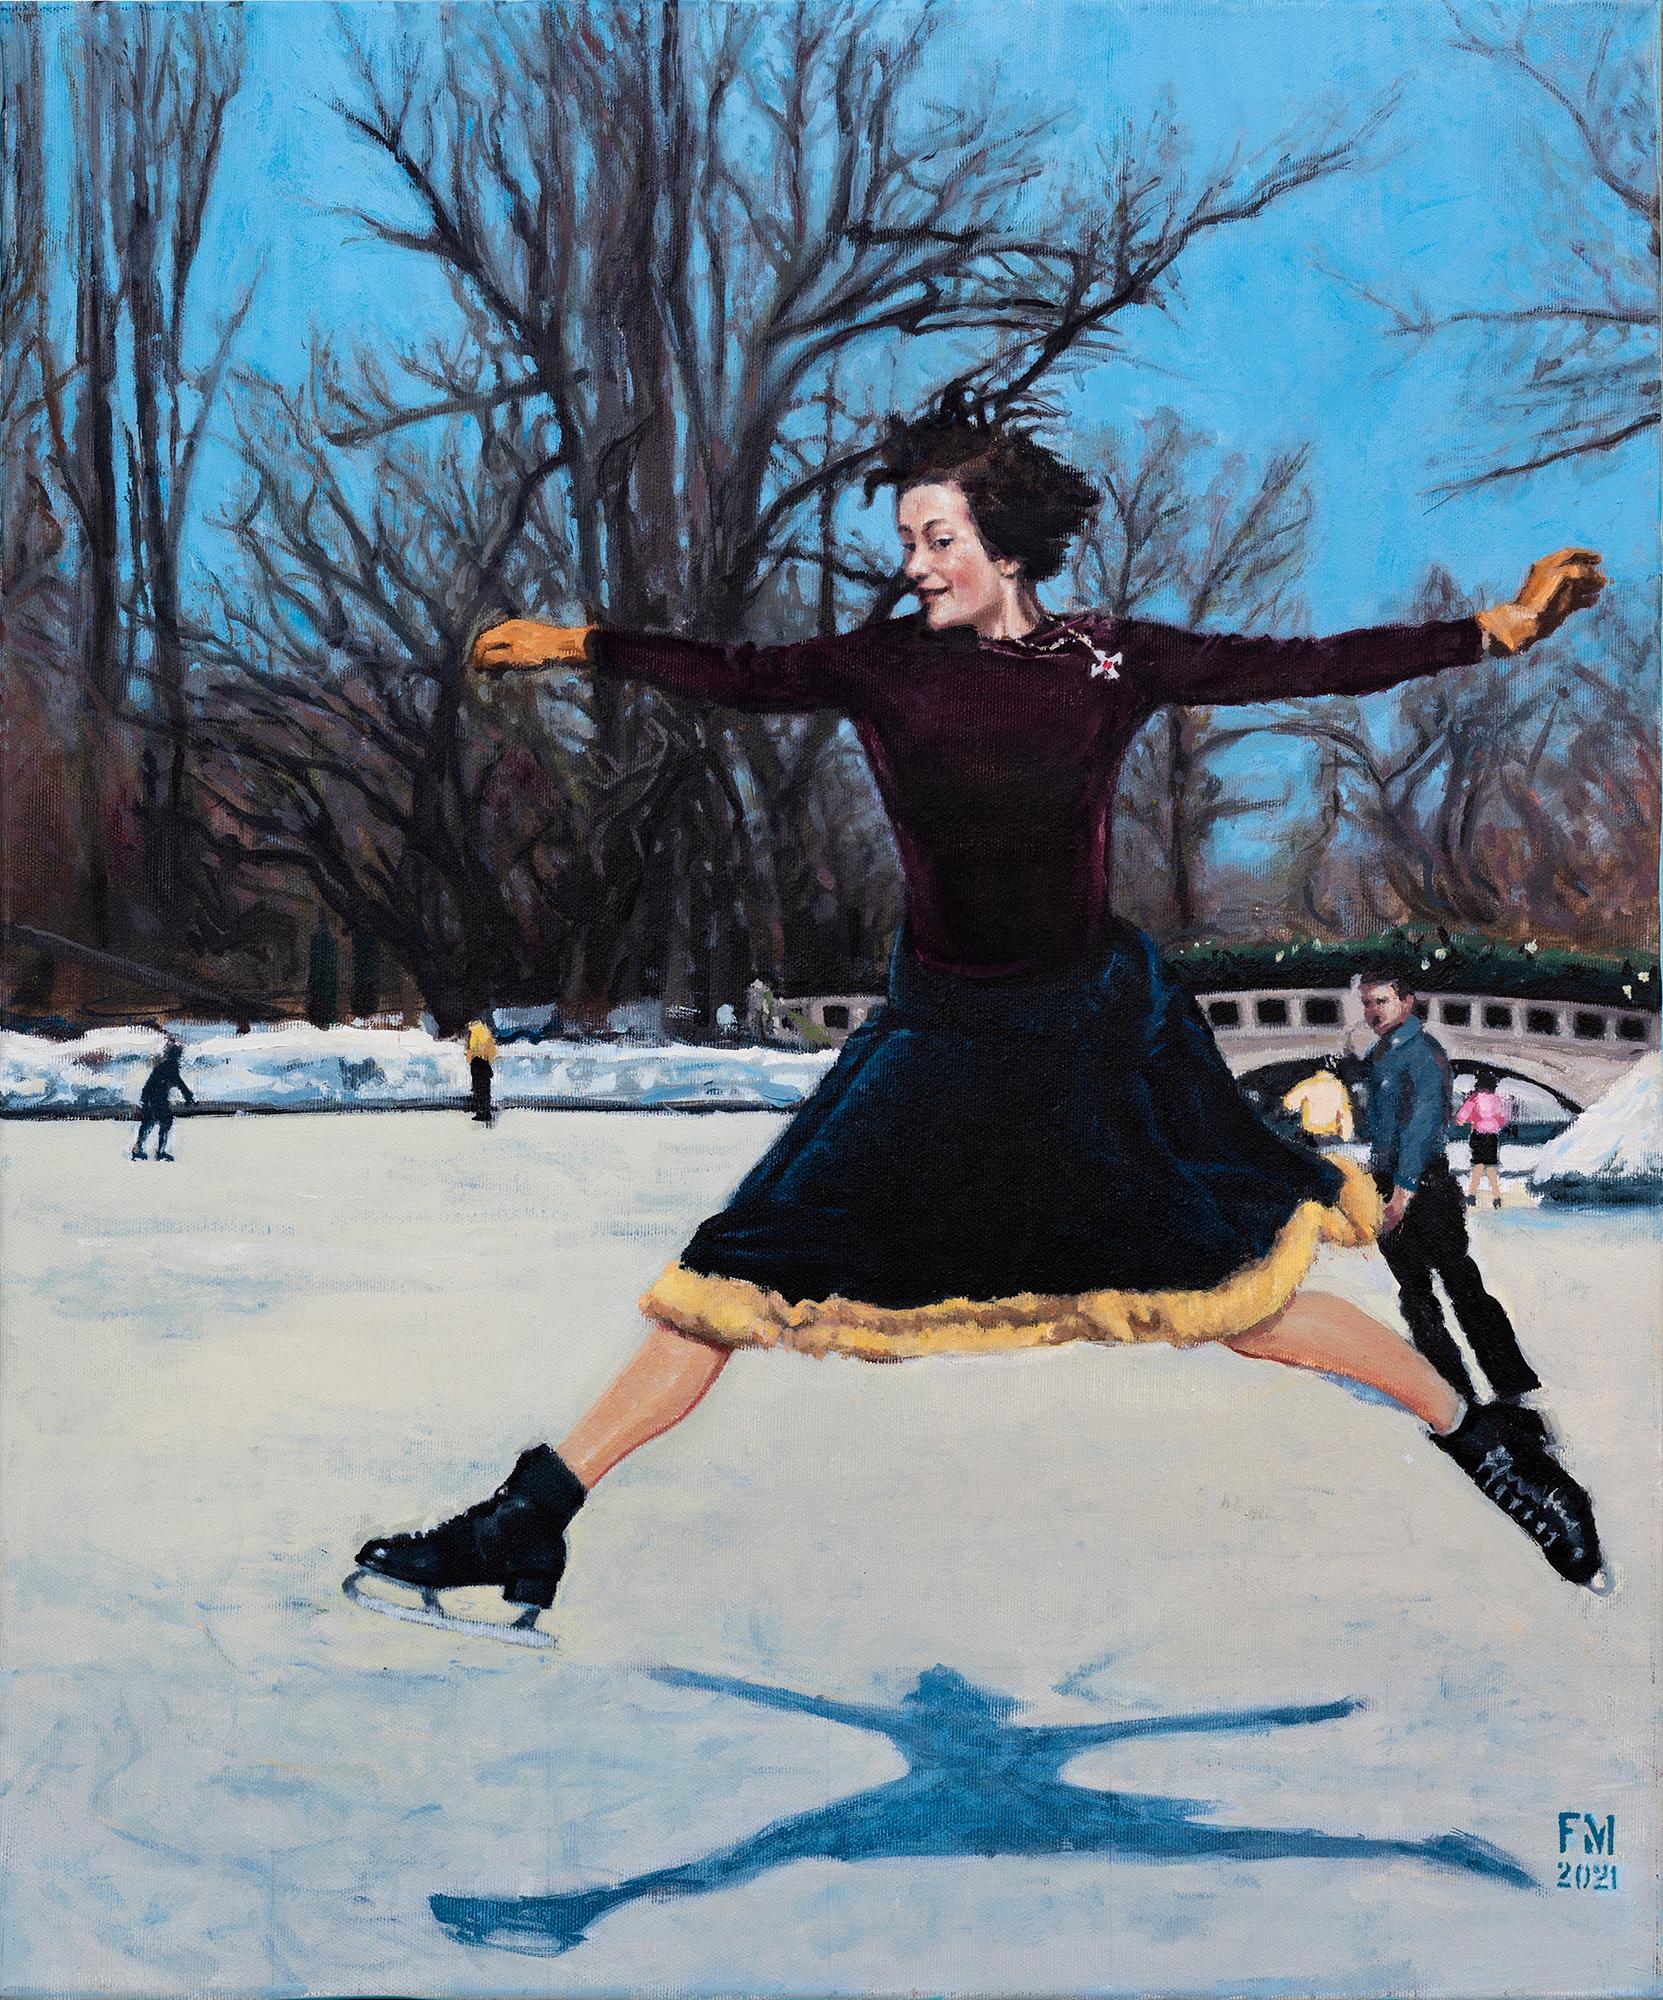 Mihai Florea Figurative Painting - Floating Between Wars - Contemporary, Cityscape, Skate, Woman, Winter, White